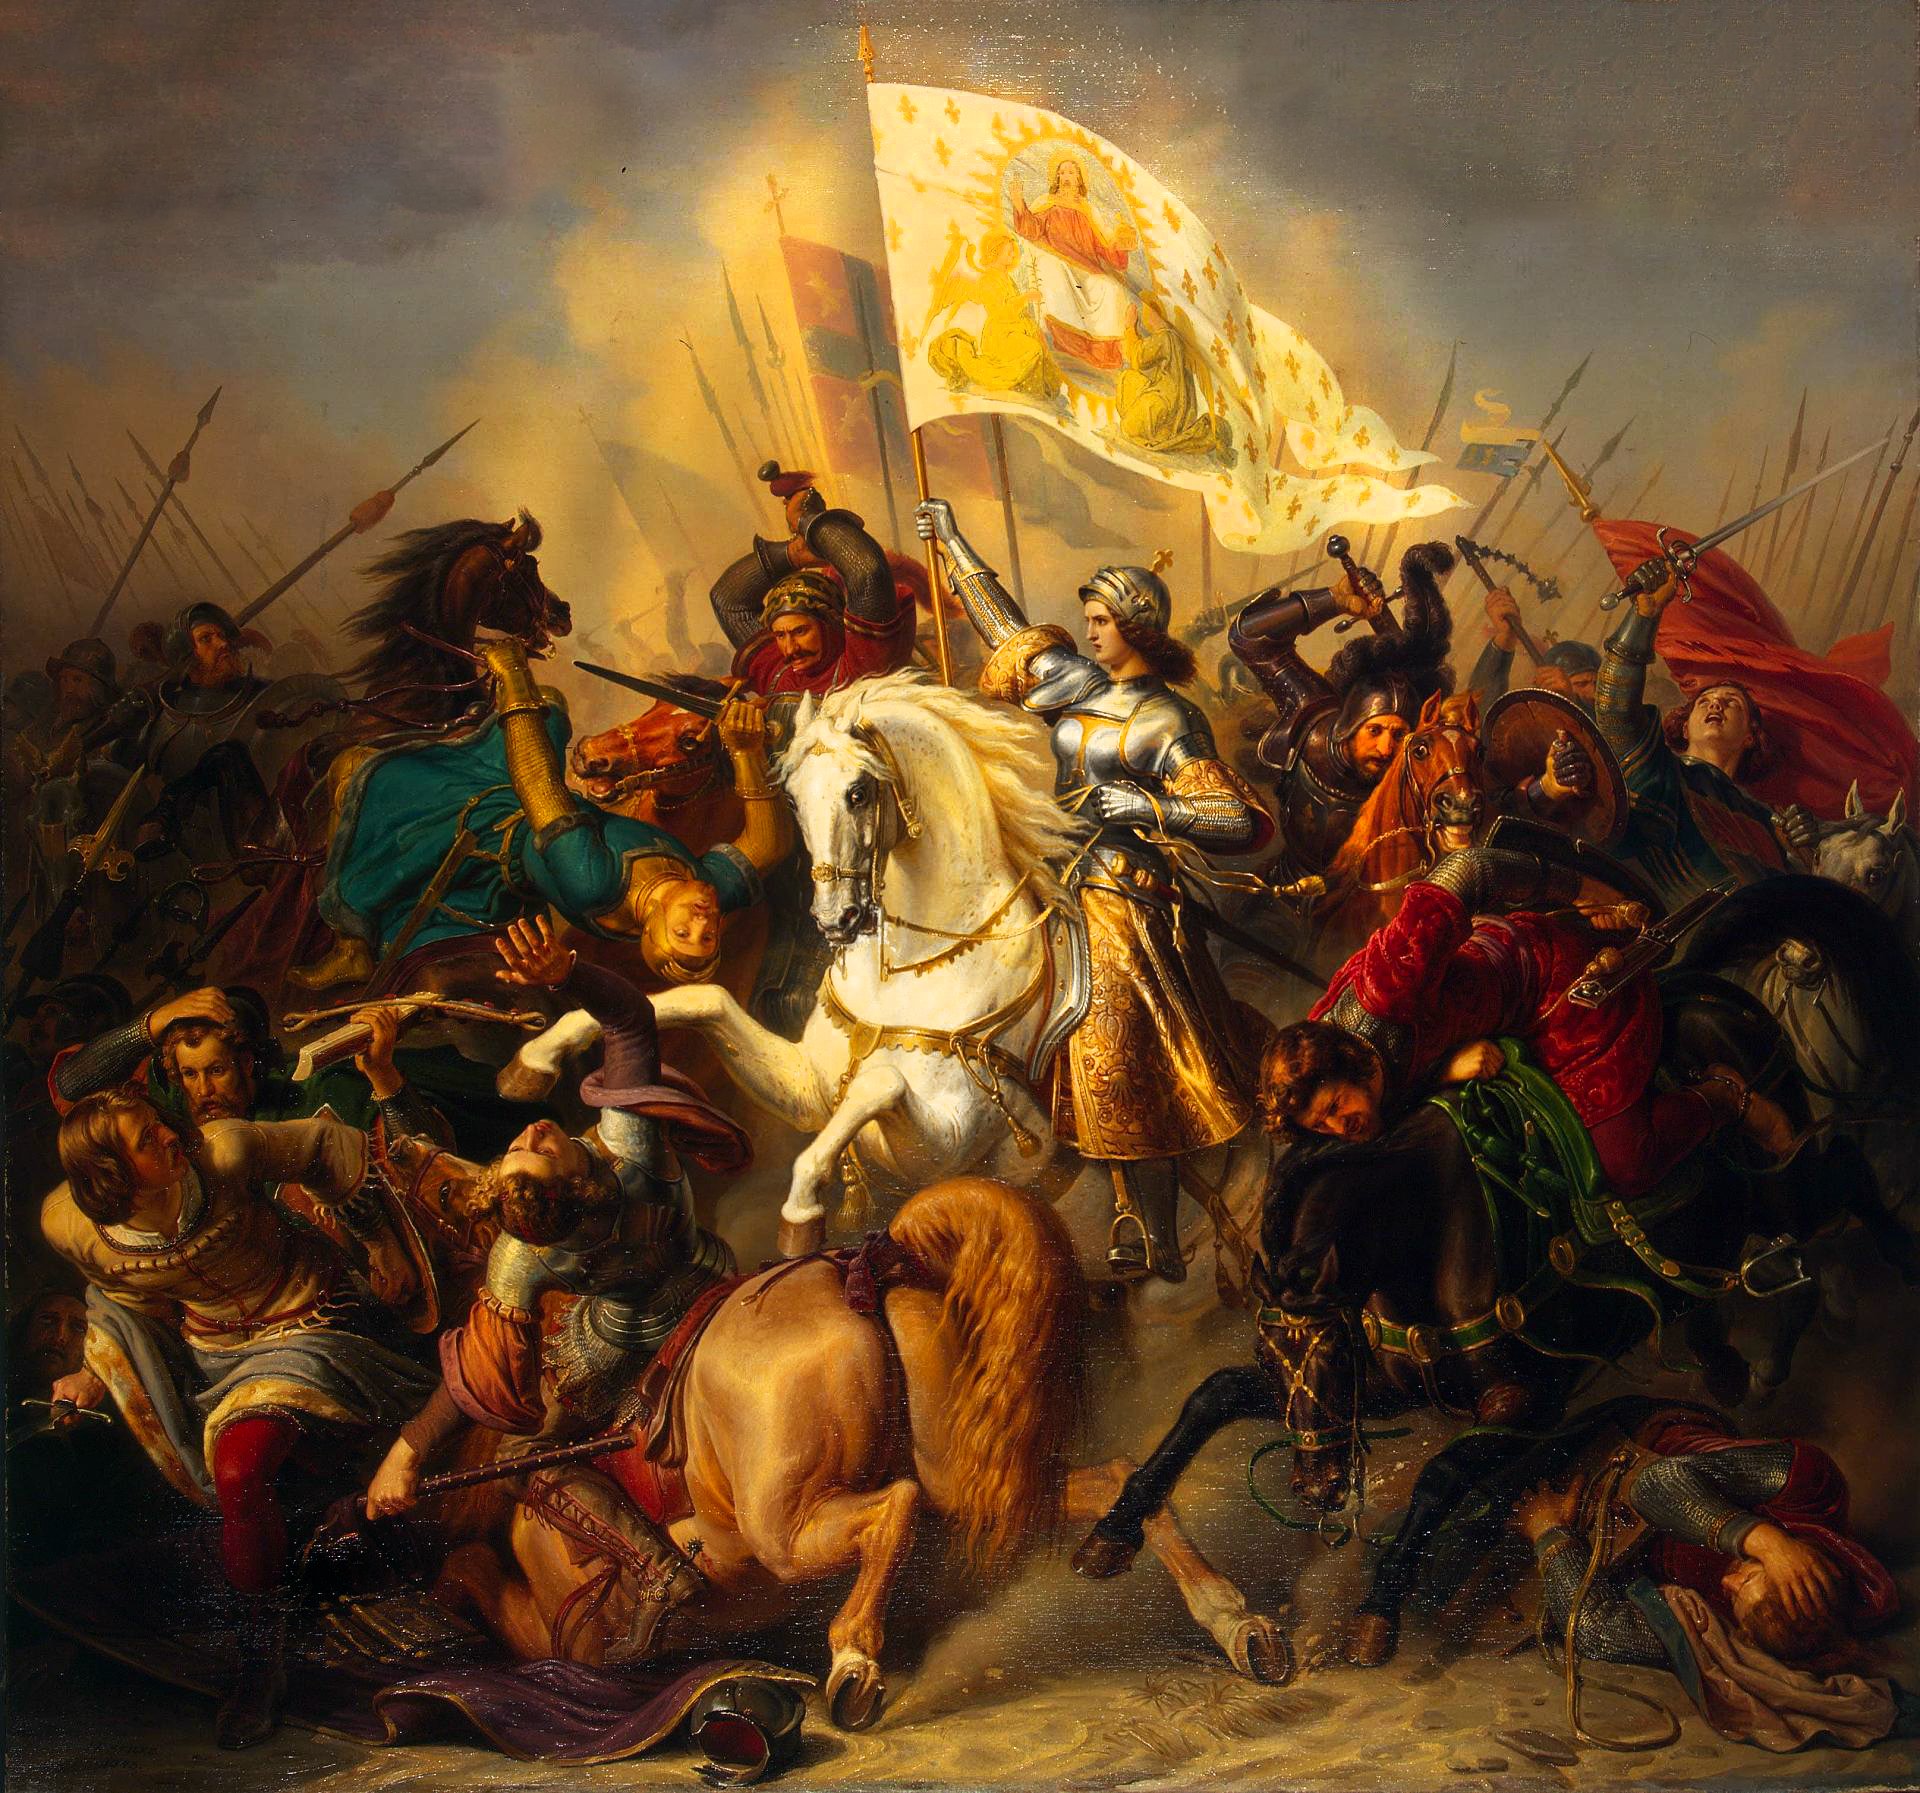 An oil painting of a battle scene with Joan of Arc dressed as a knight on horseback carrying a white flag with a saint on it. She is surrounded by soldiers and horses, some of whom are fighting and some of whom are fallen.